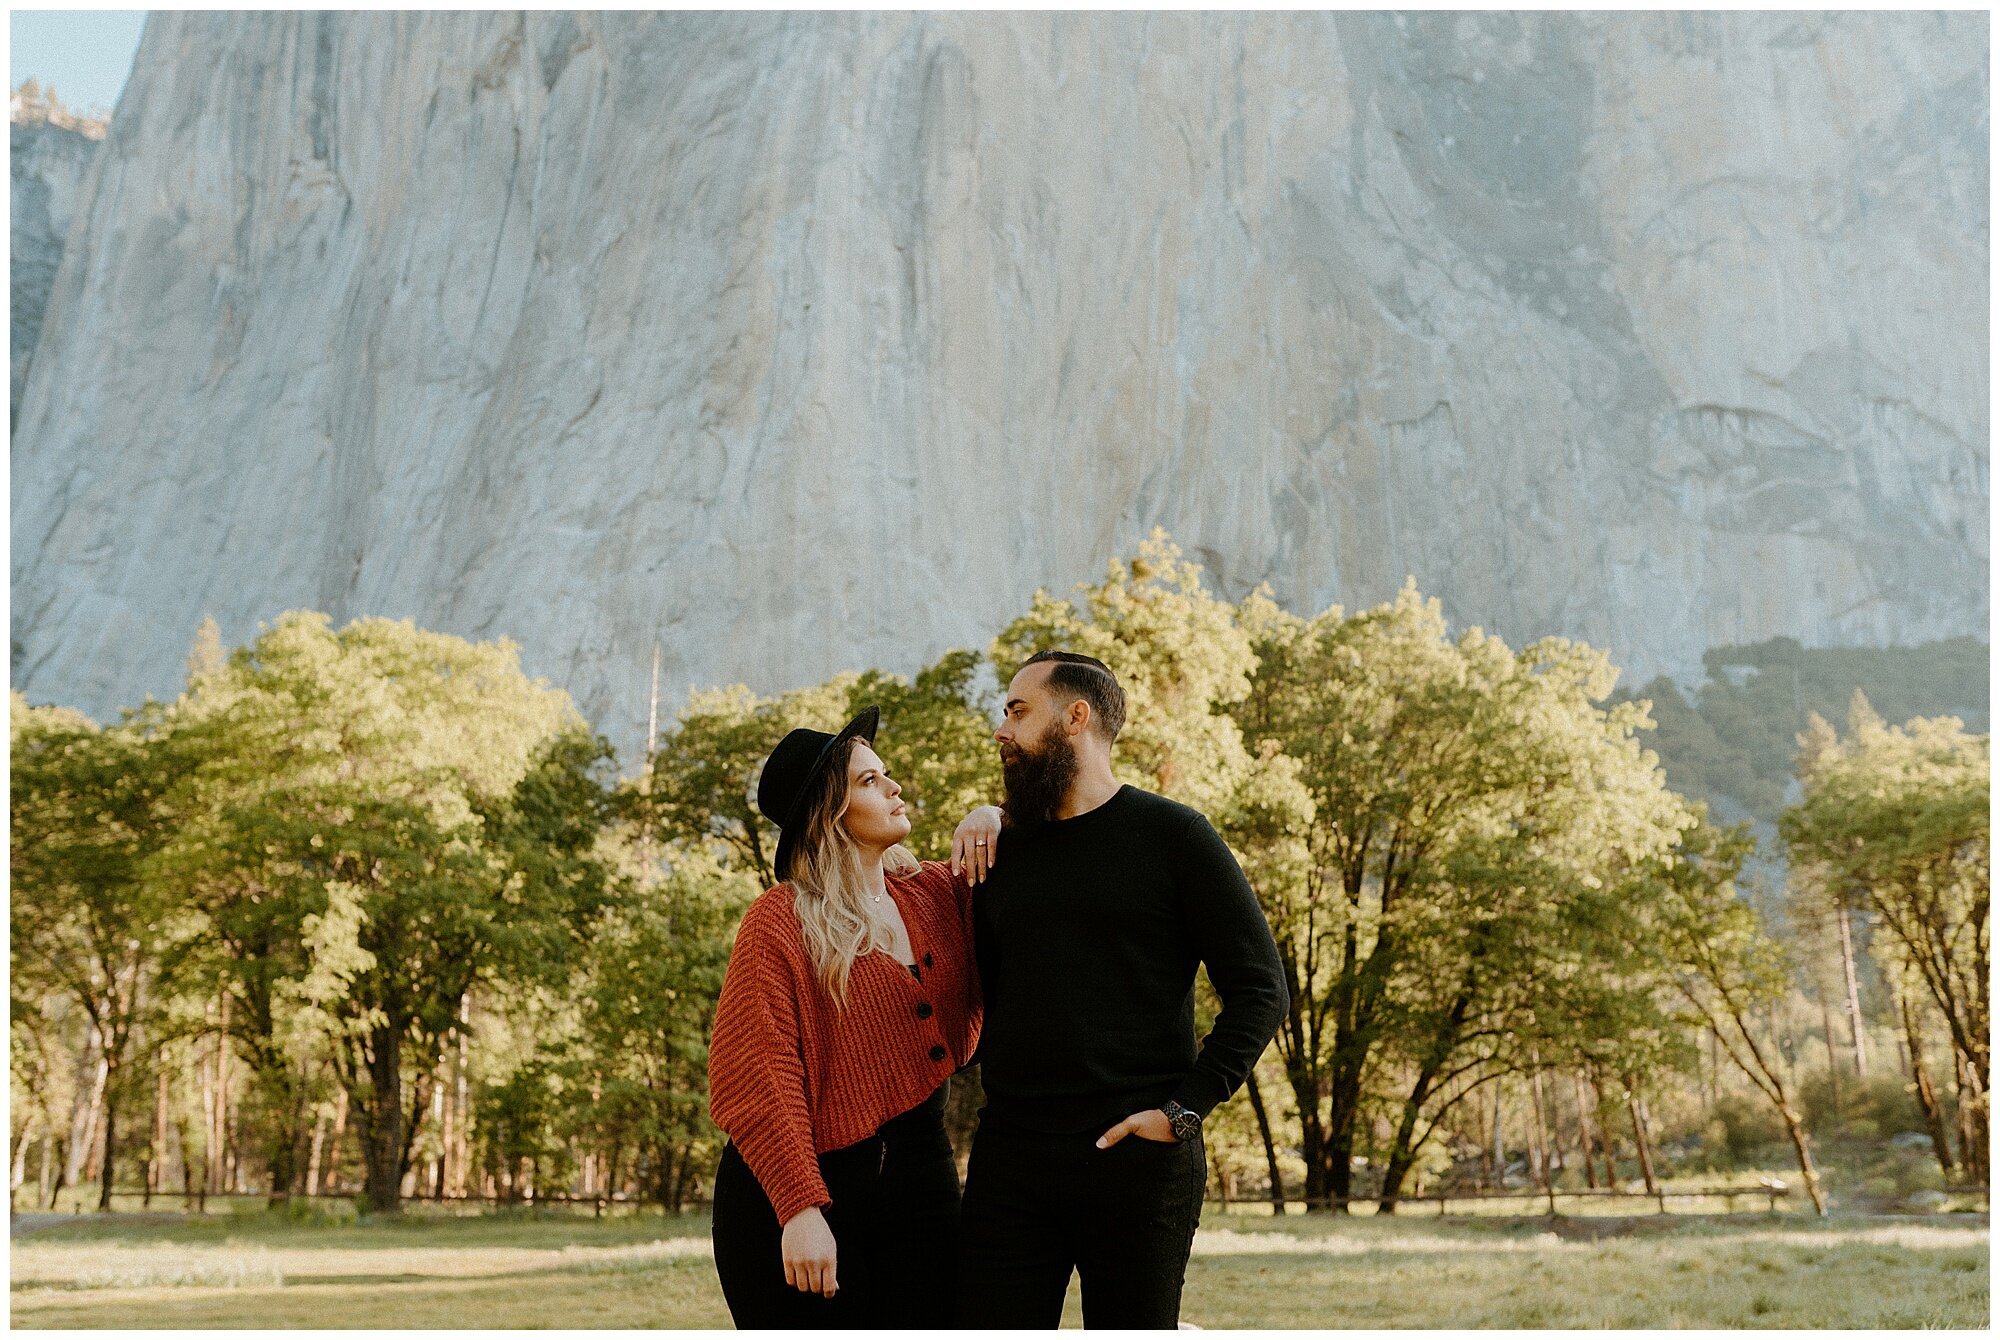 Jaqueline and Ronnie's Yosemite Engagement Session_0001.jpg